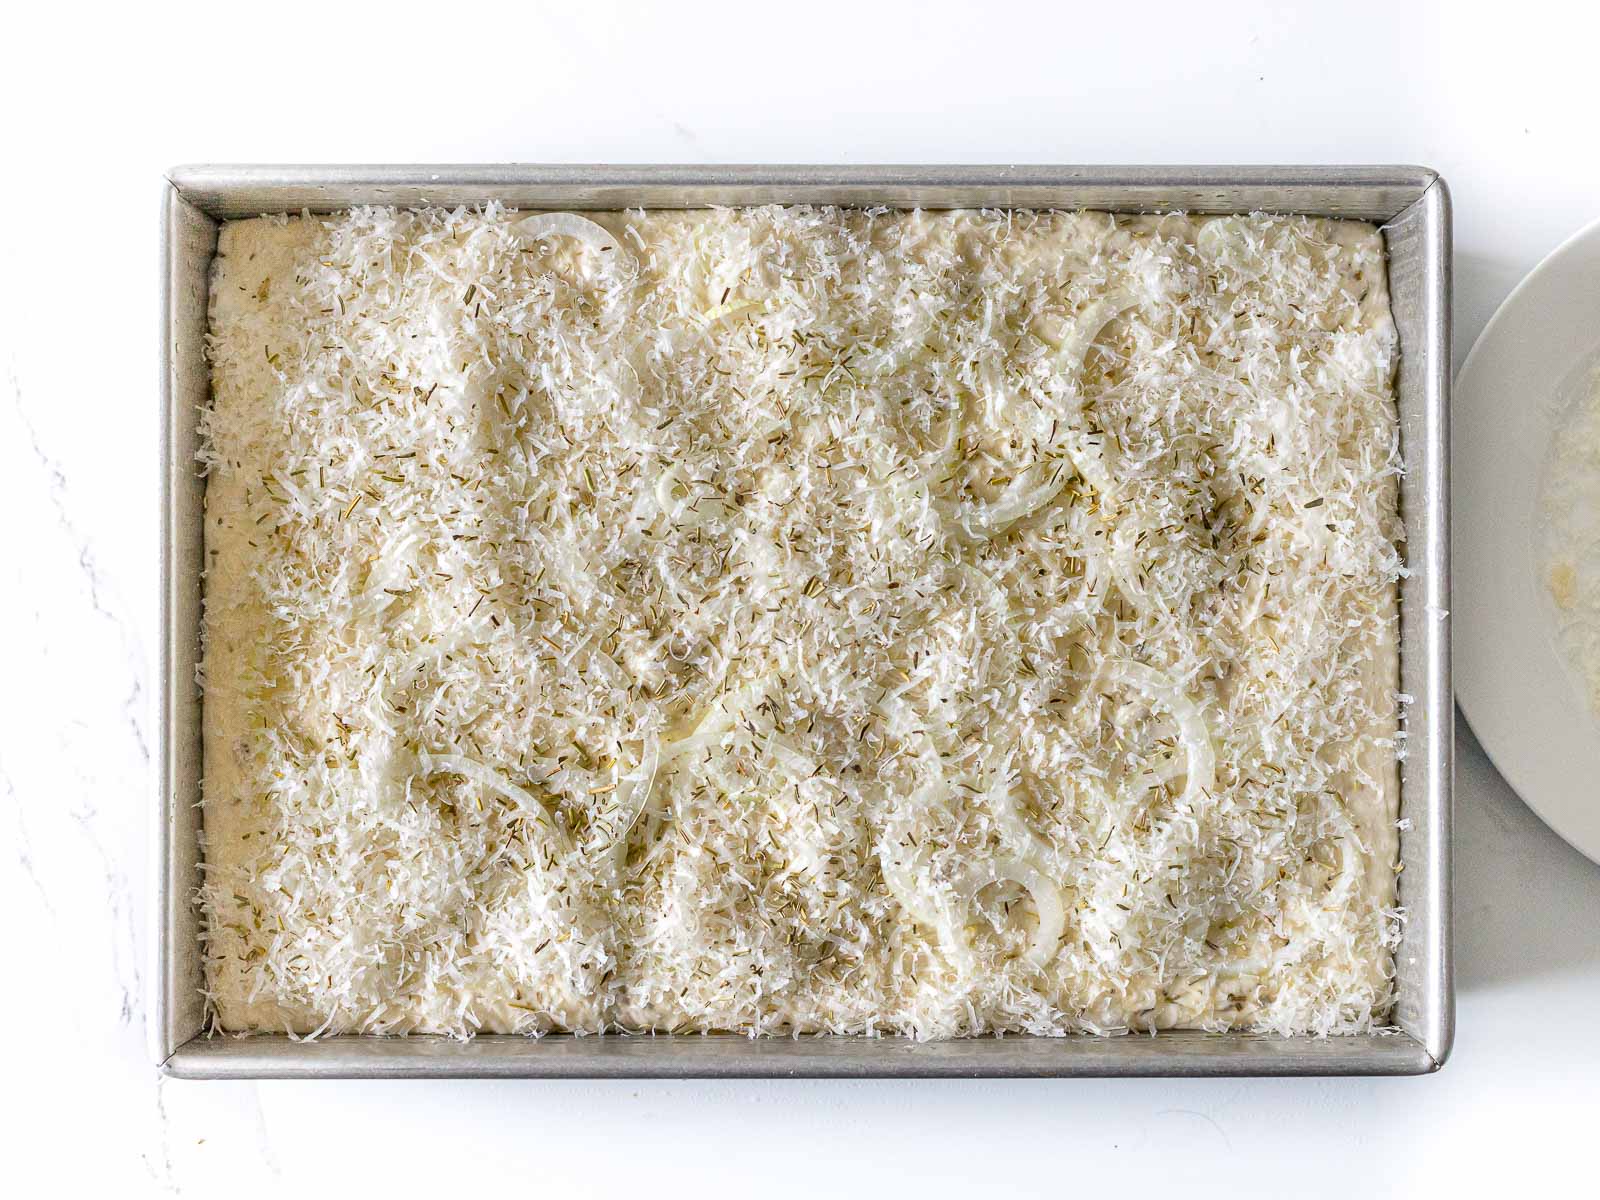 focaccia dough topped with parmesan cheese, onions, and rosemary in a baking dish